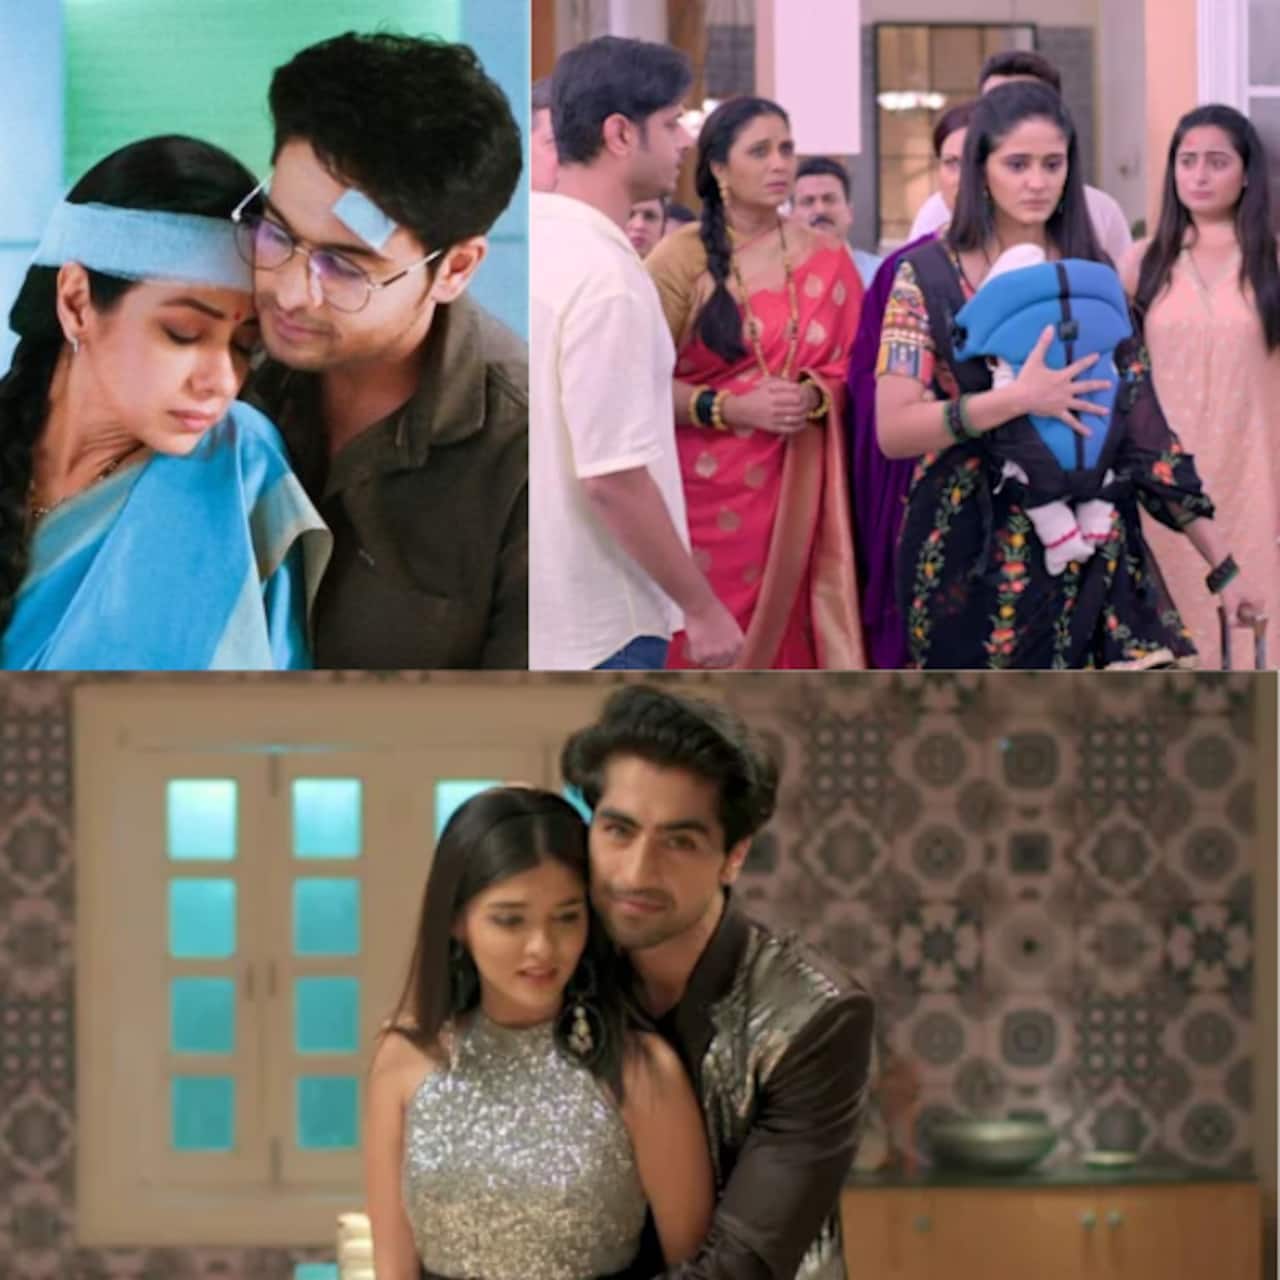 TV shows that we're a huge hit in on TRP charts